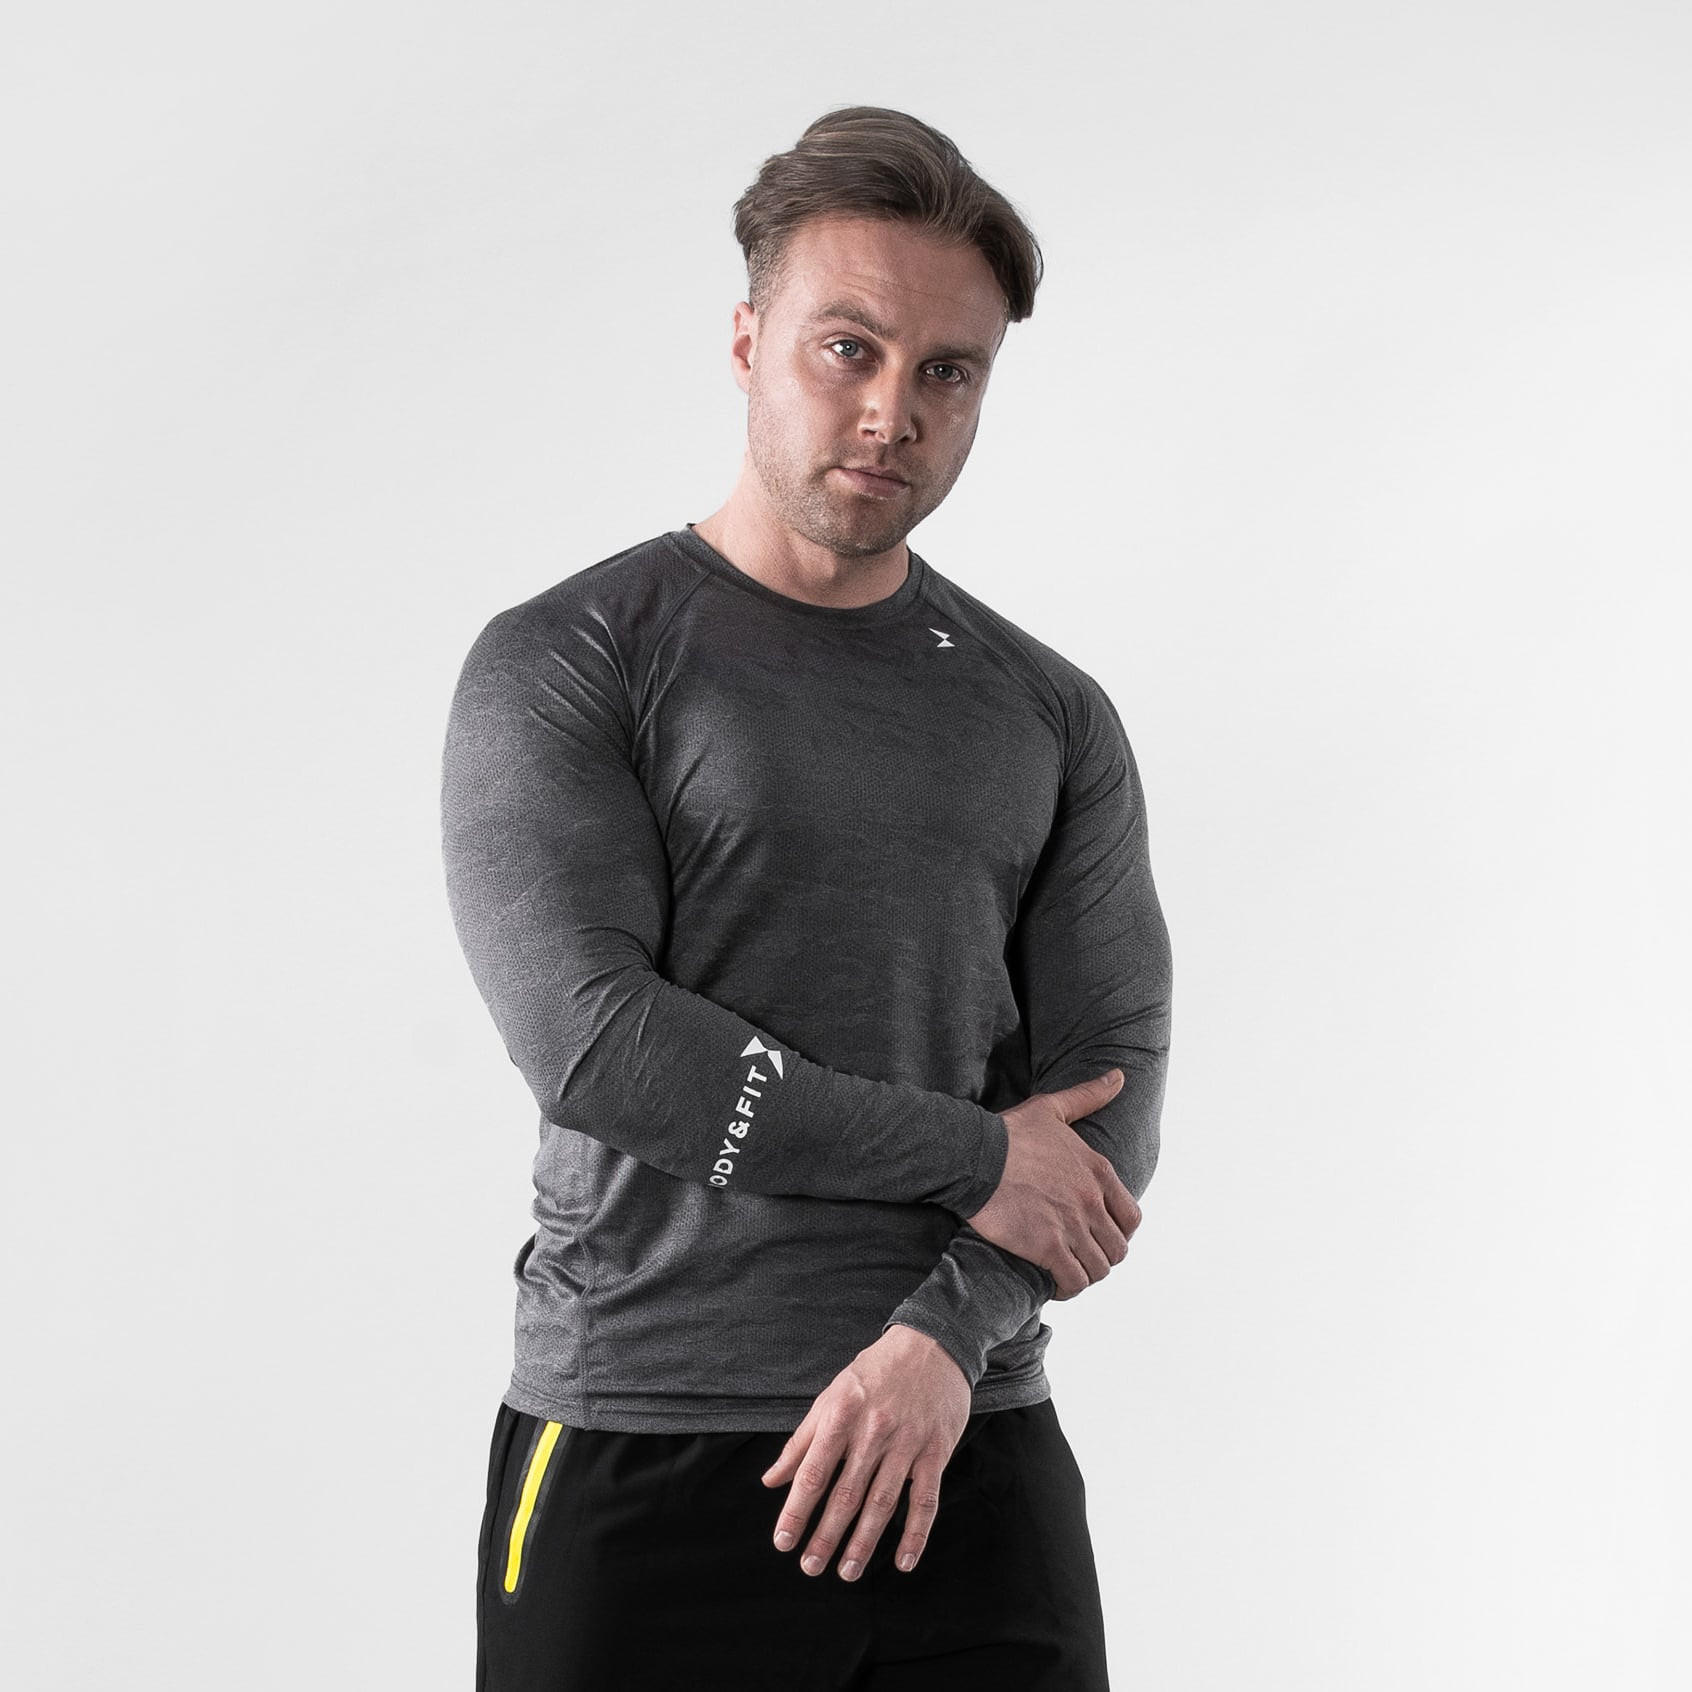 Fitness Clothing & Accessories